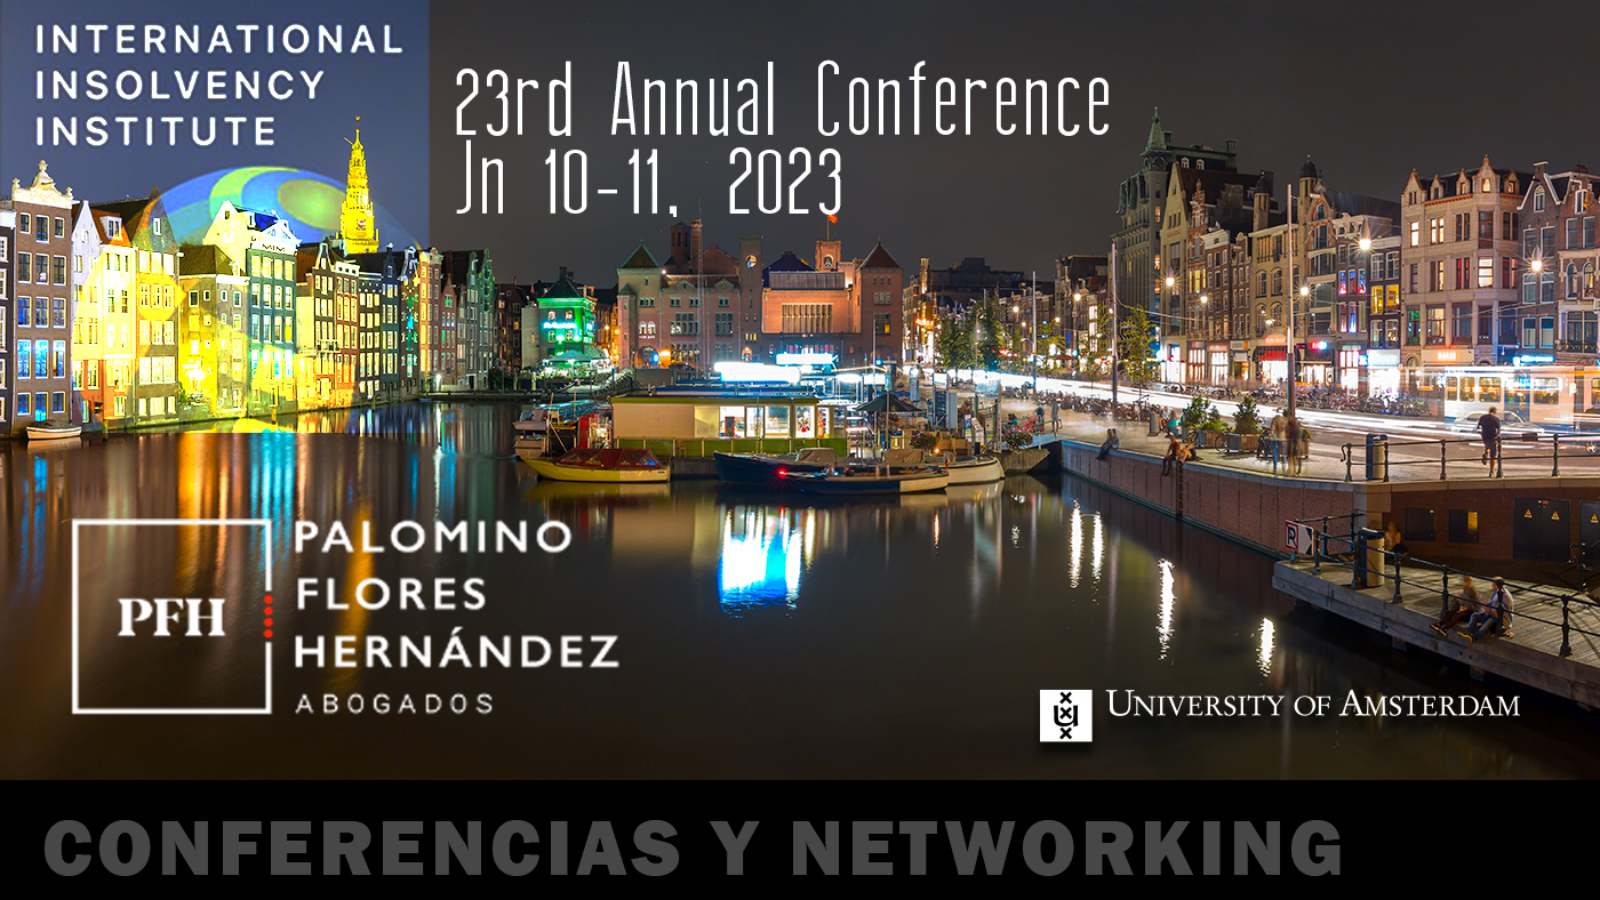 Amsterdam-23rd-Annual-Conference-Palomino-Flores-Hernandez-Abogados